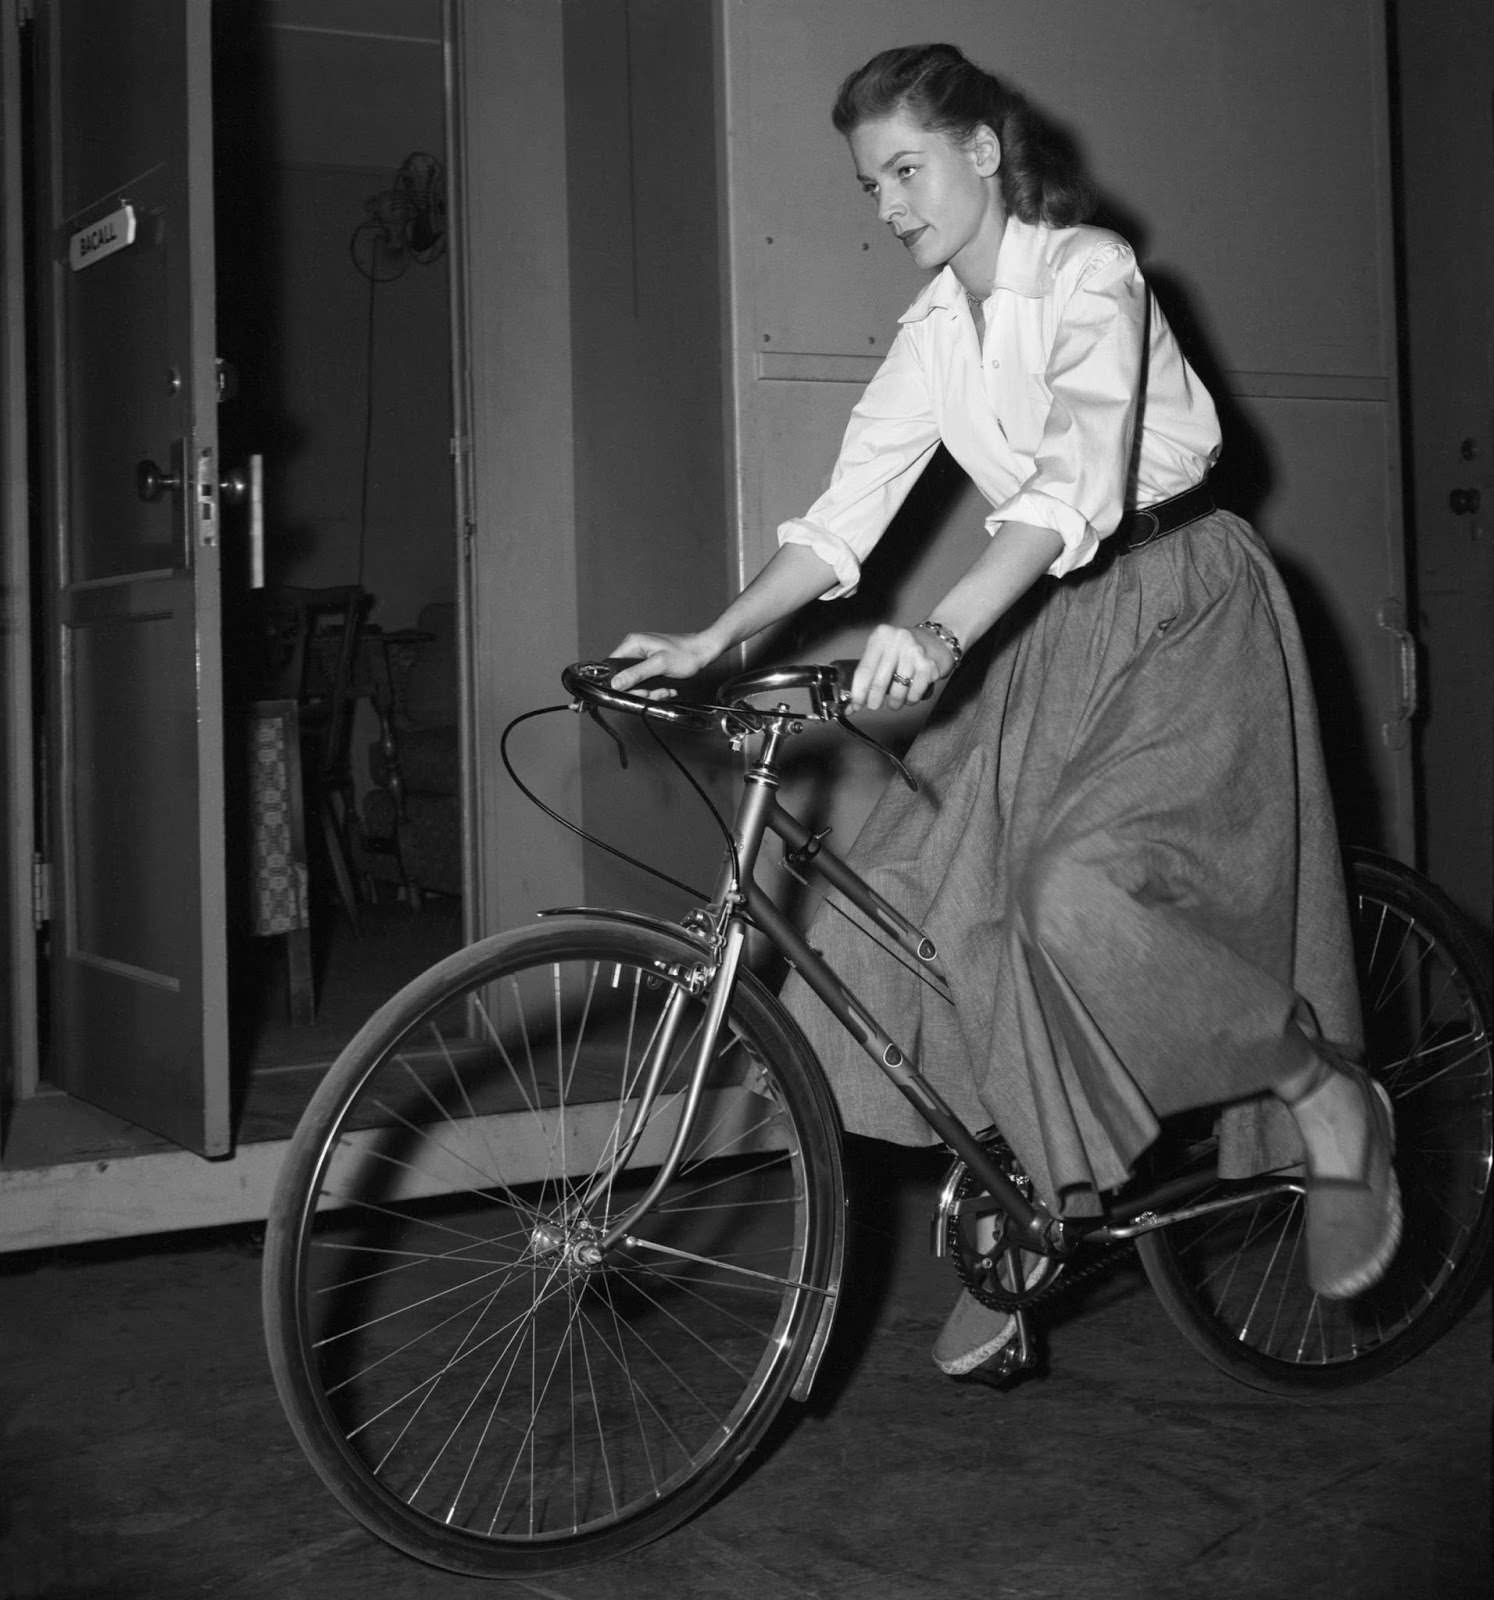 Only she could ably ride a bike in a full skirt, 1948.